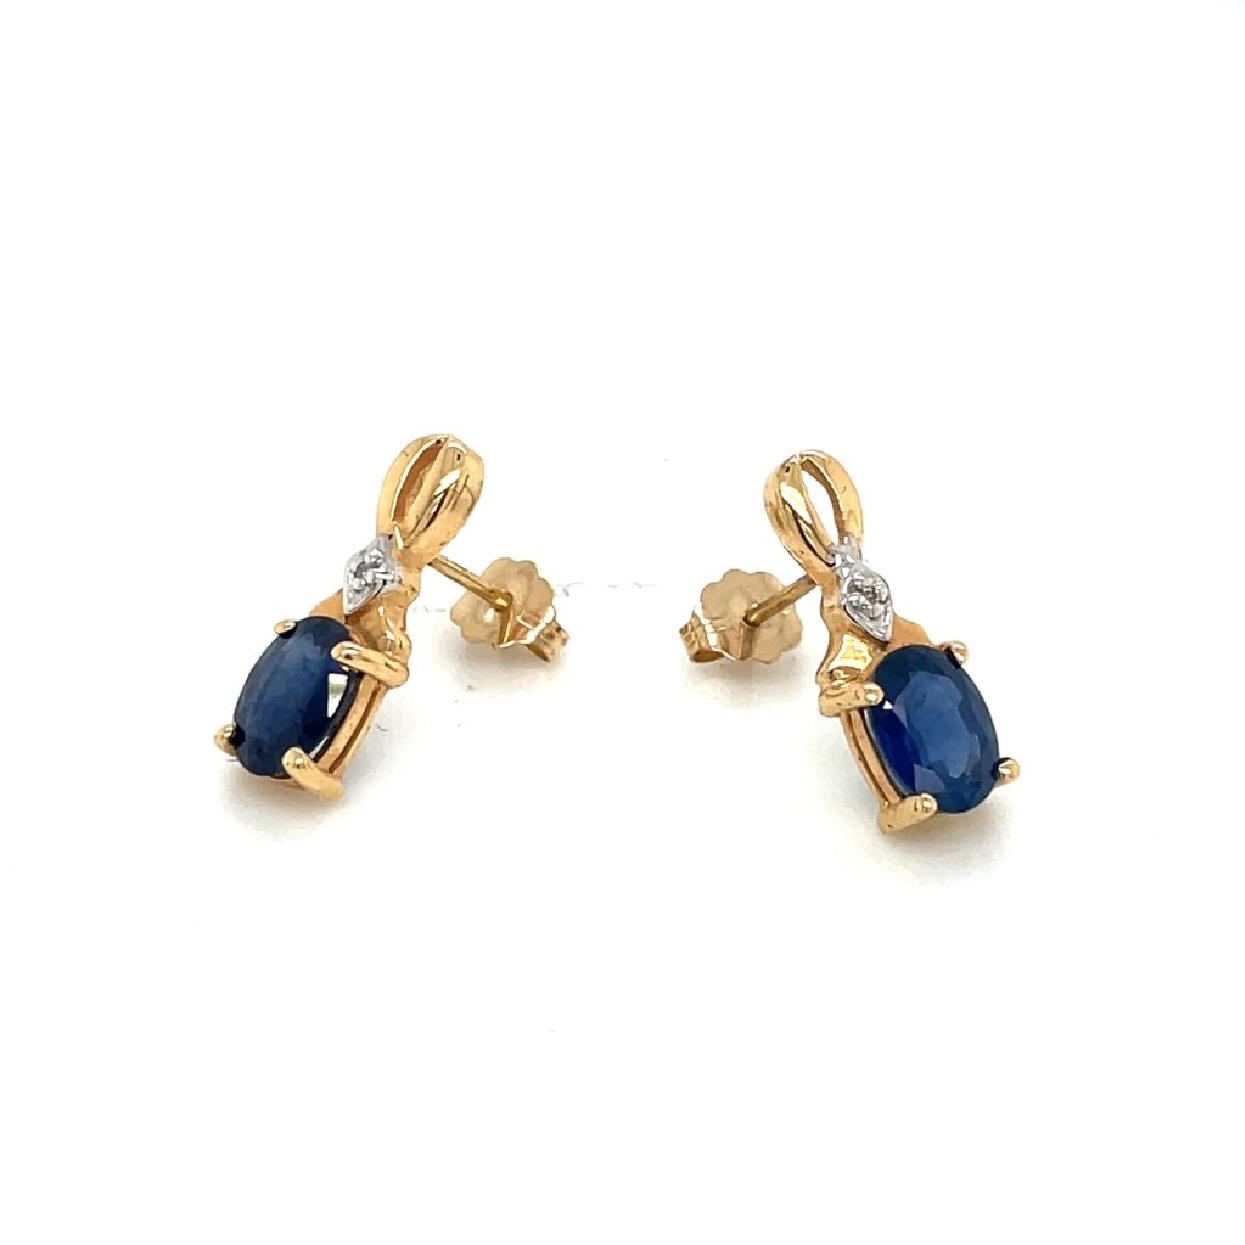 Sapphire 14k Yellow Gold Studs with Diamond Accents
1.9ct Sapphires & .15ct Dia